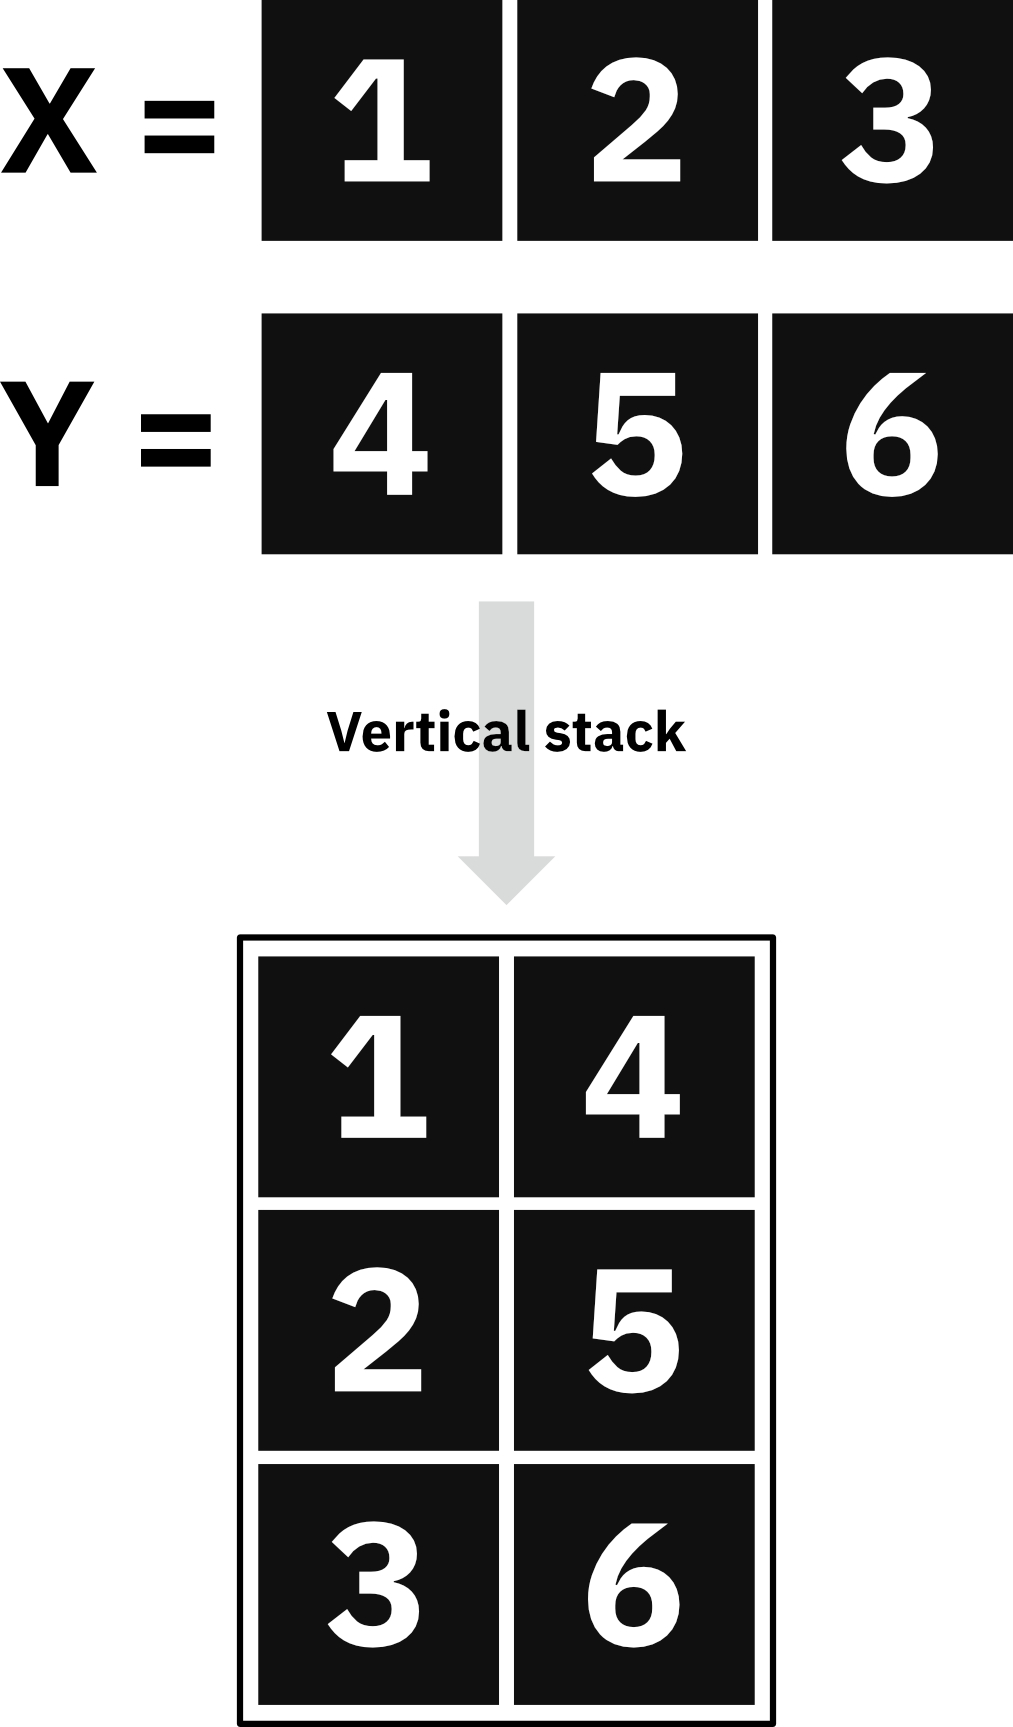 Image 2 - Vertical stacking explained (image by author)